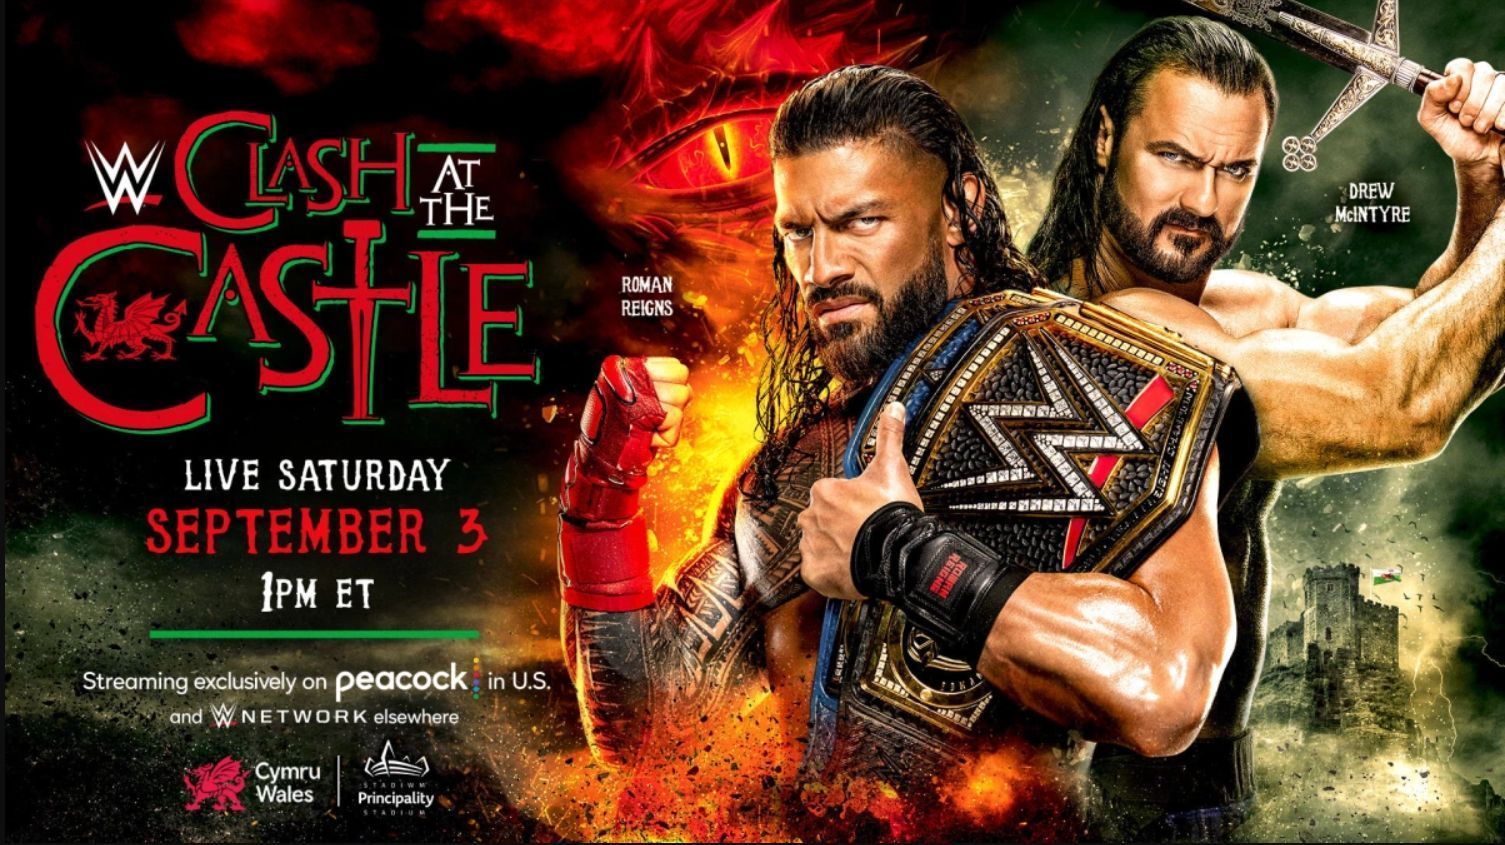 WWE Clash at the Castle tickets are selling like hotcakes